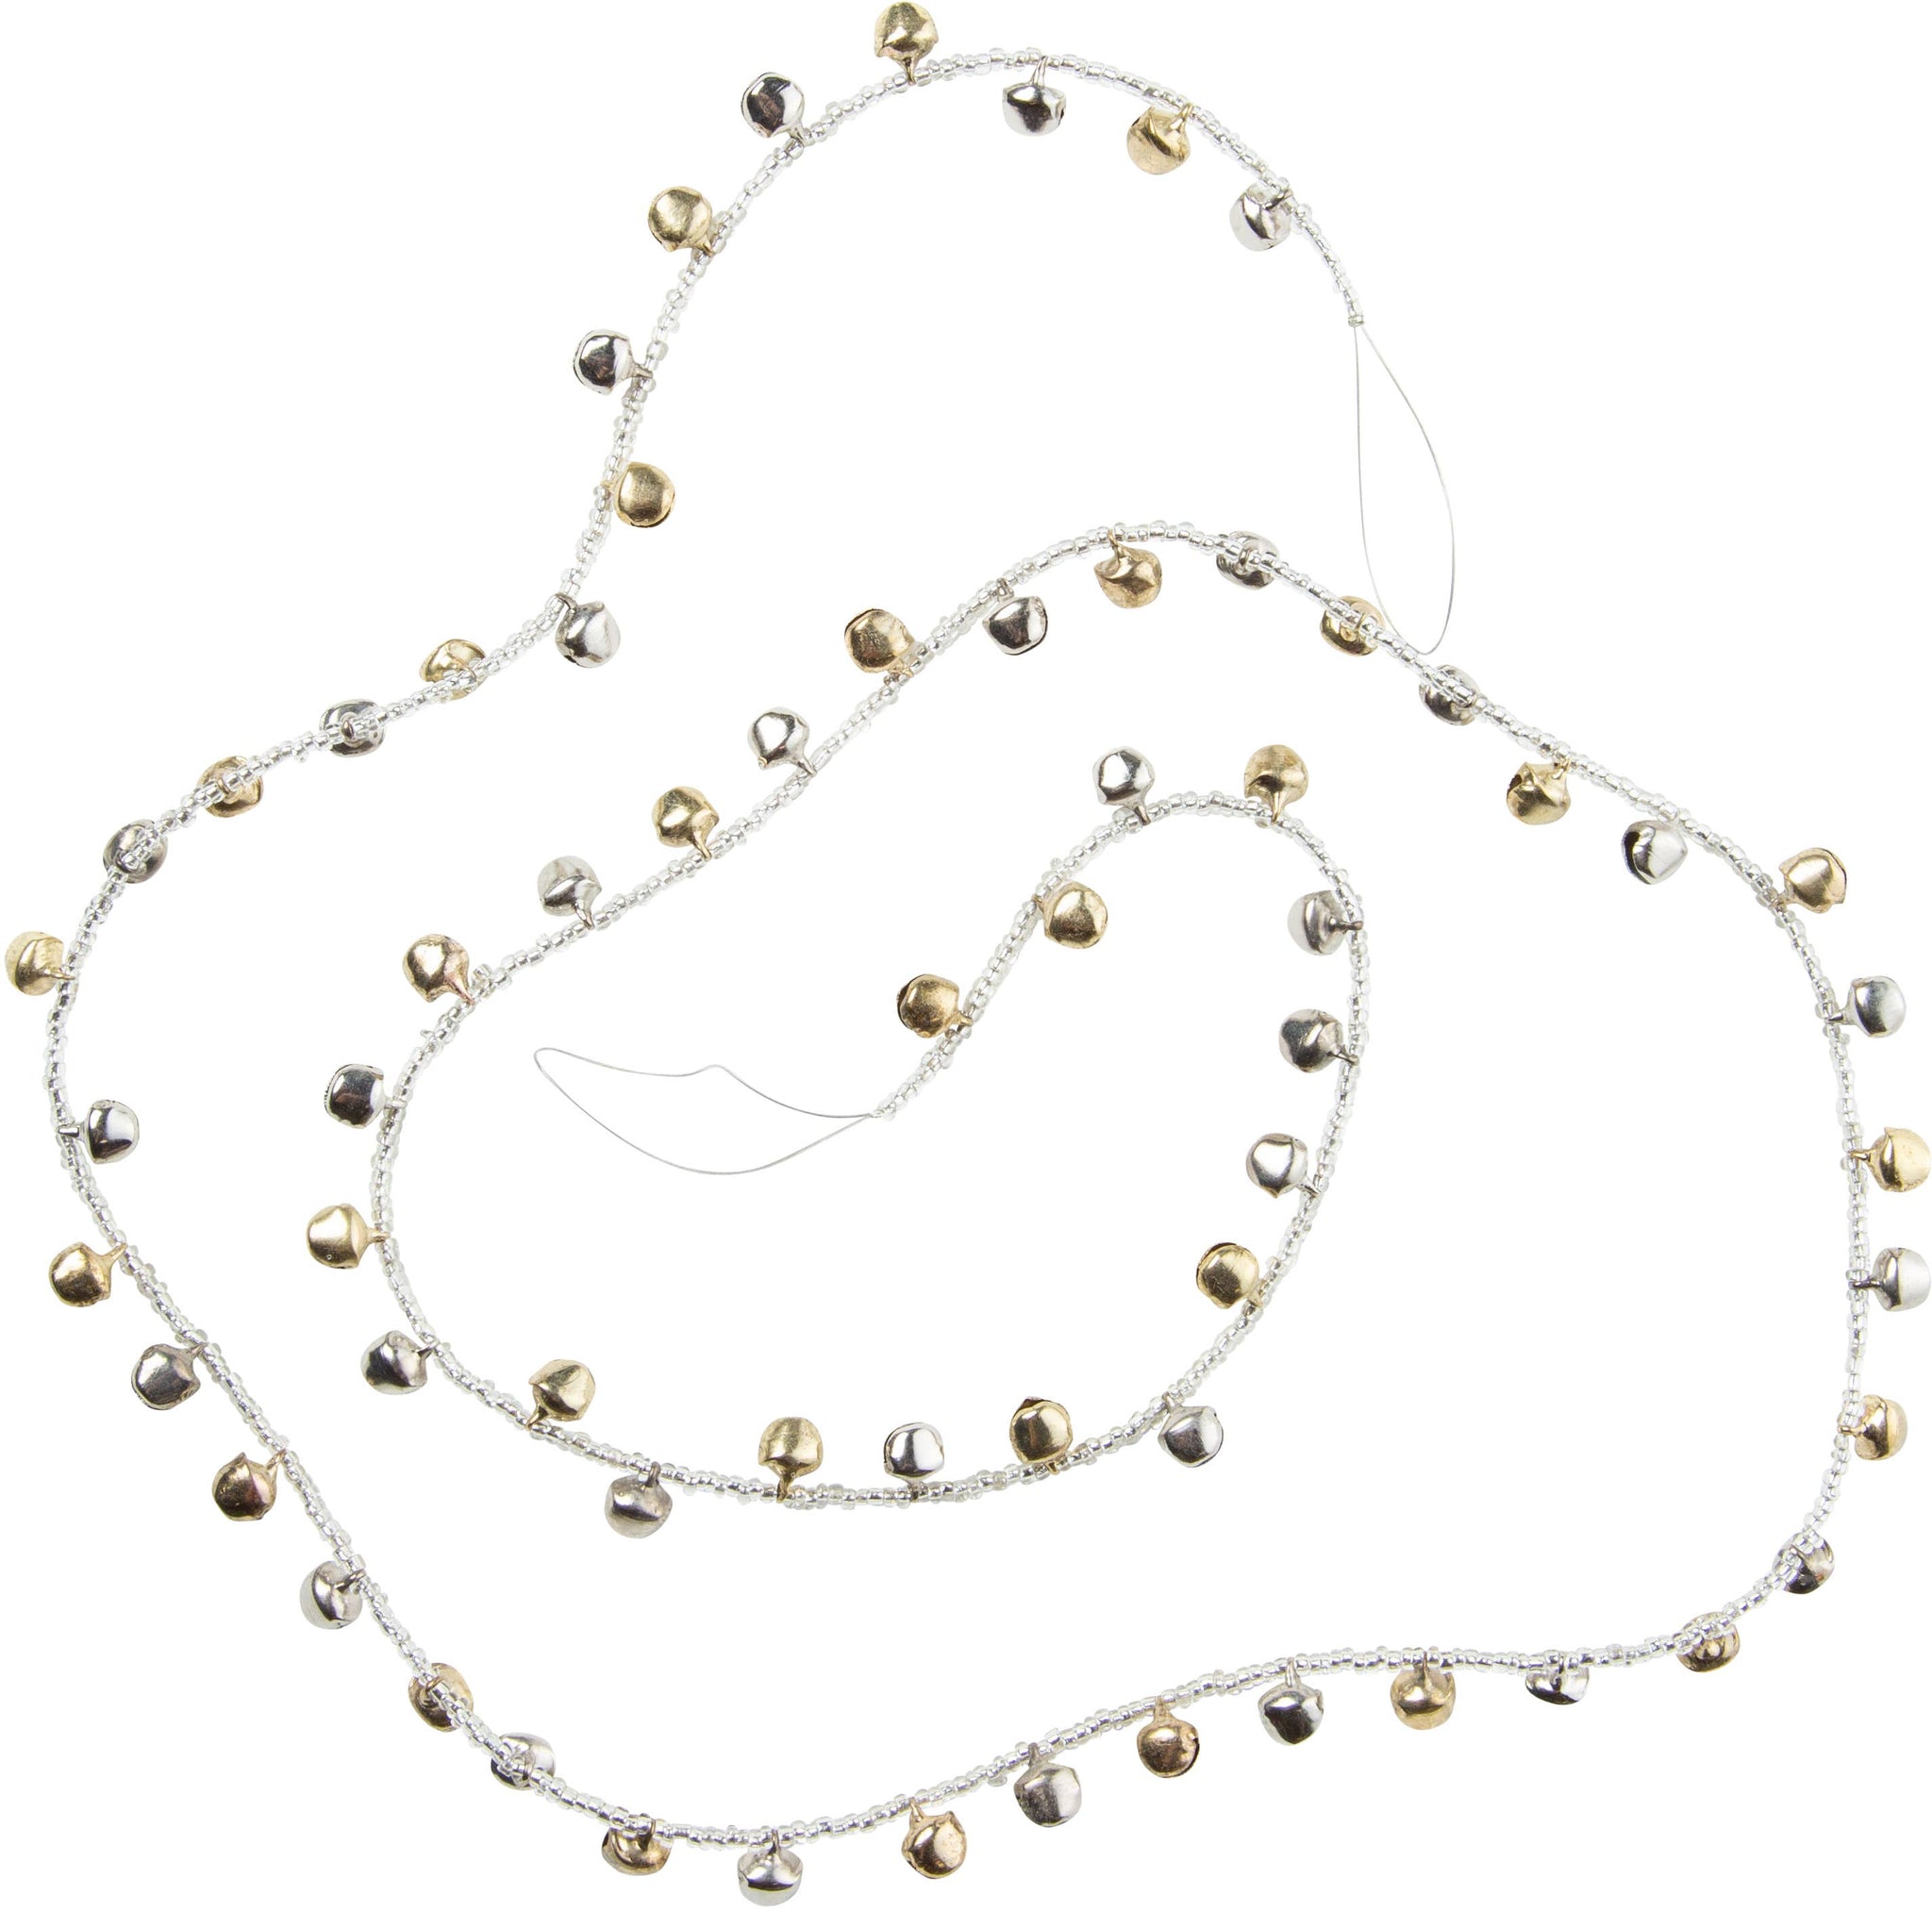 Glass bead and jingle bell garland ,silver and gold